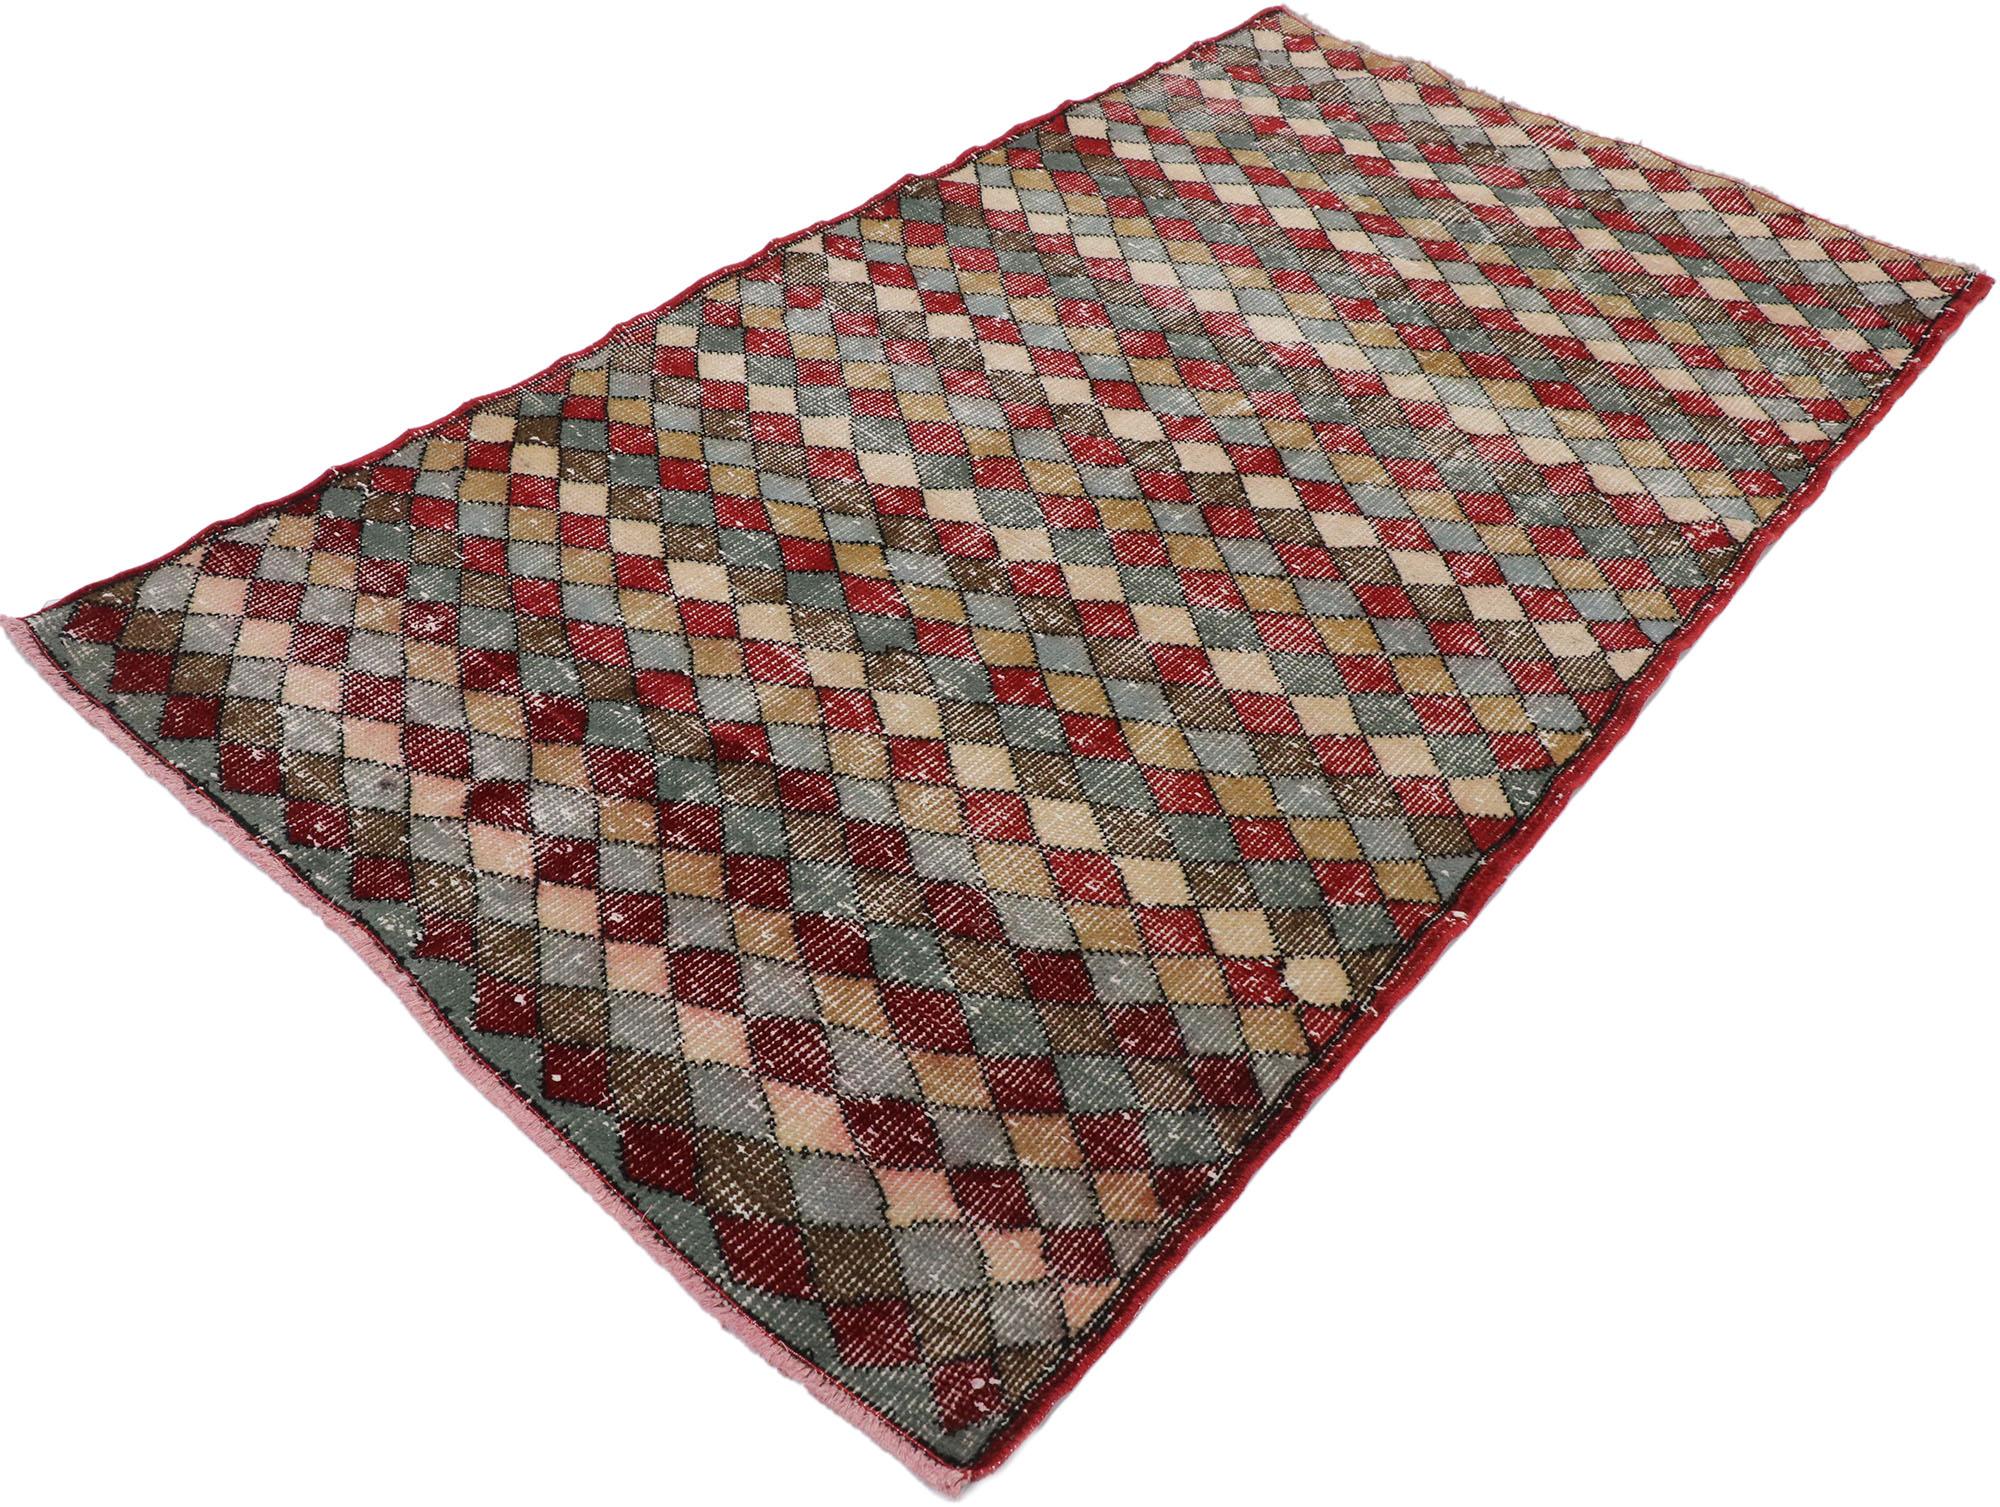 53321 distressed vintage Turkish Sivas rug with rustic Mid-Century Modern style. This hand knotted wool distressed vintage Turkish Sivas rug features an all-over checkered stripe pattern comprised of rows of multi-colored diamonds. Each row of